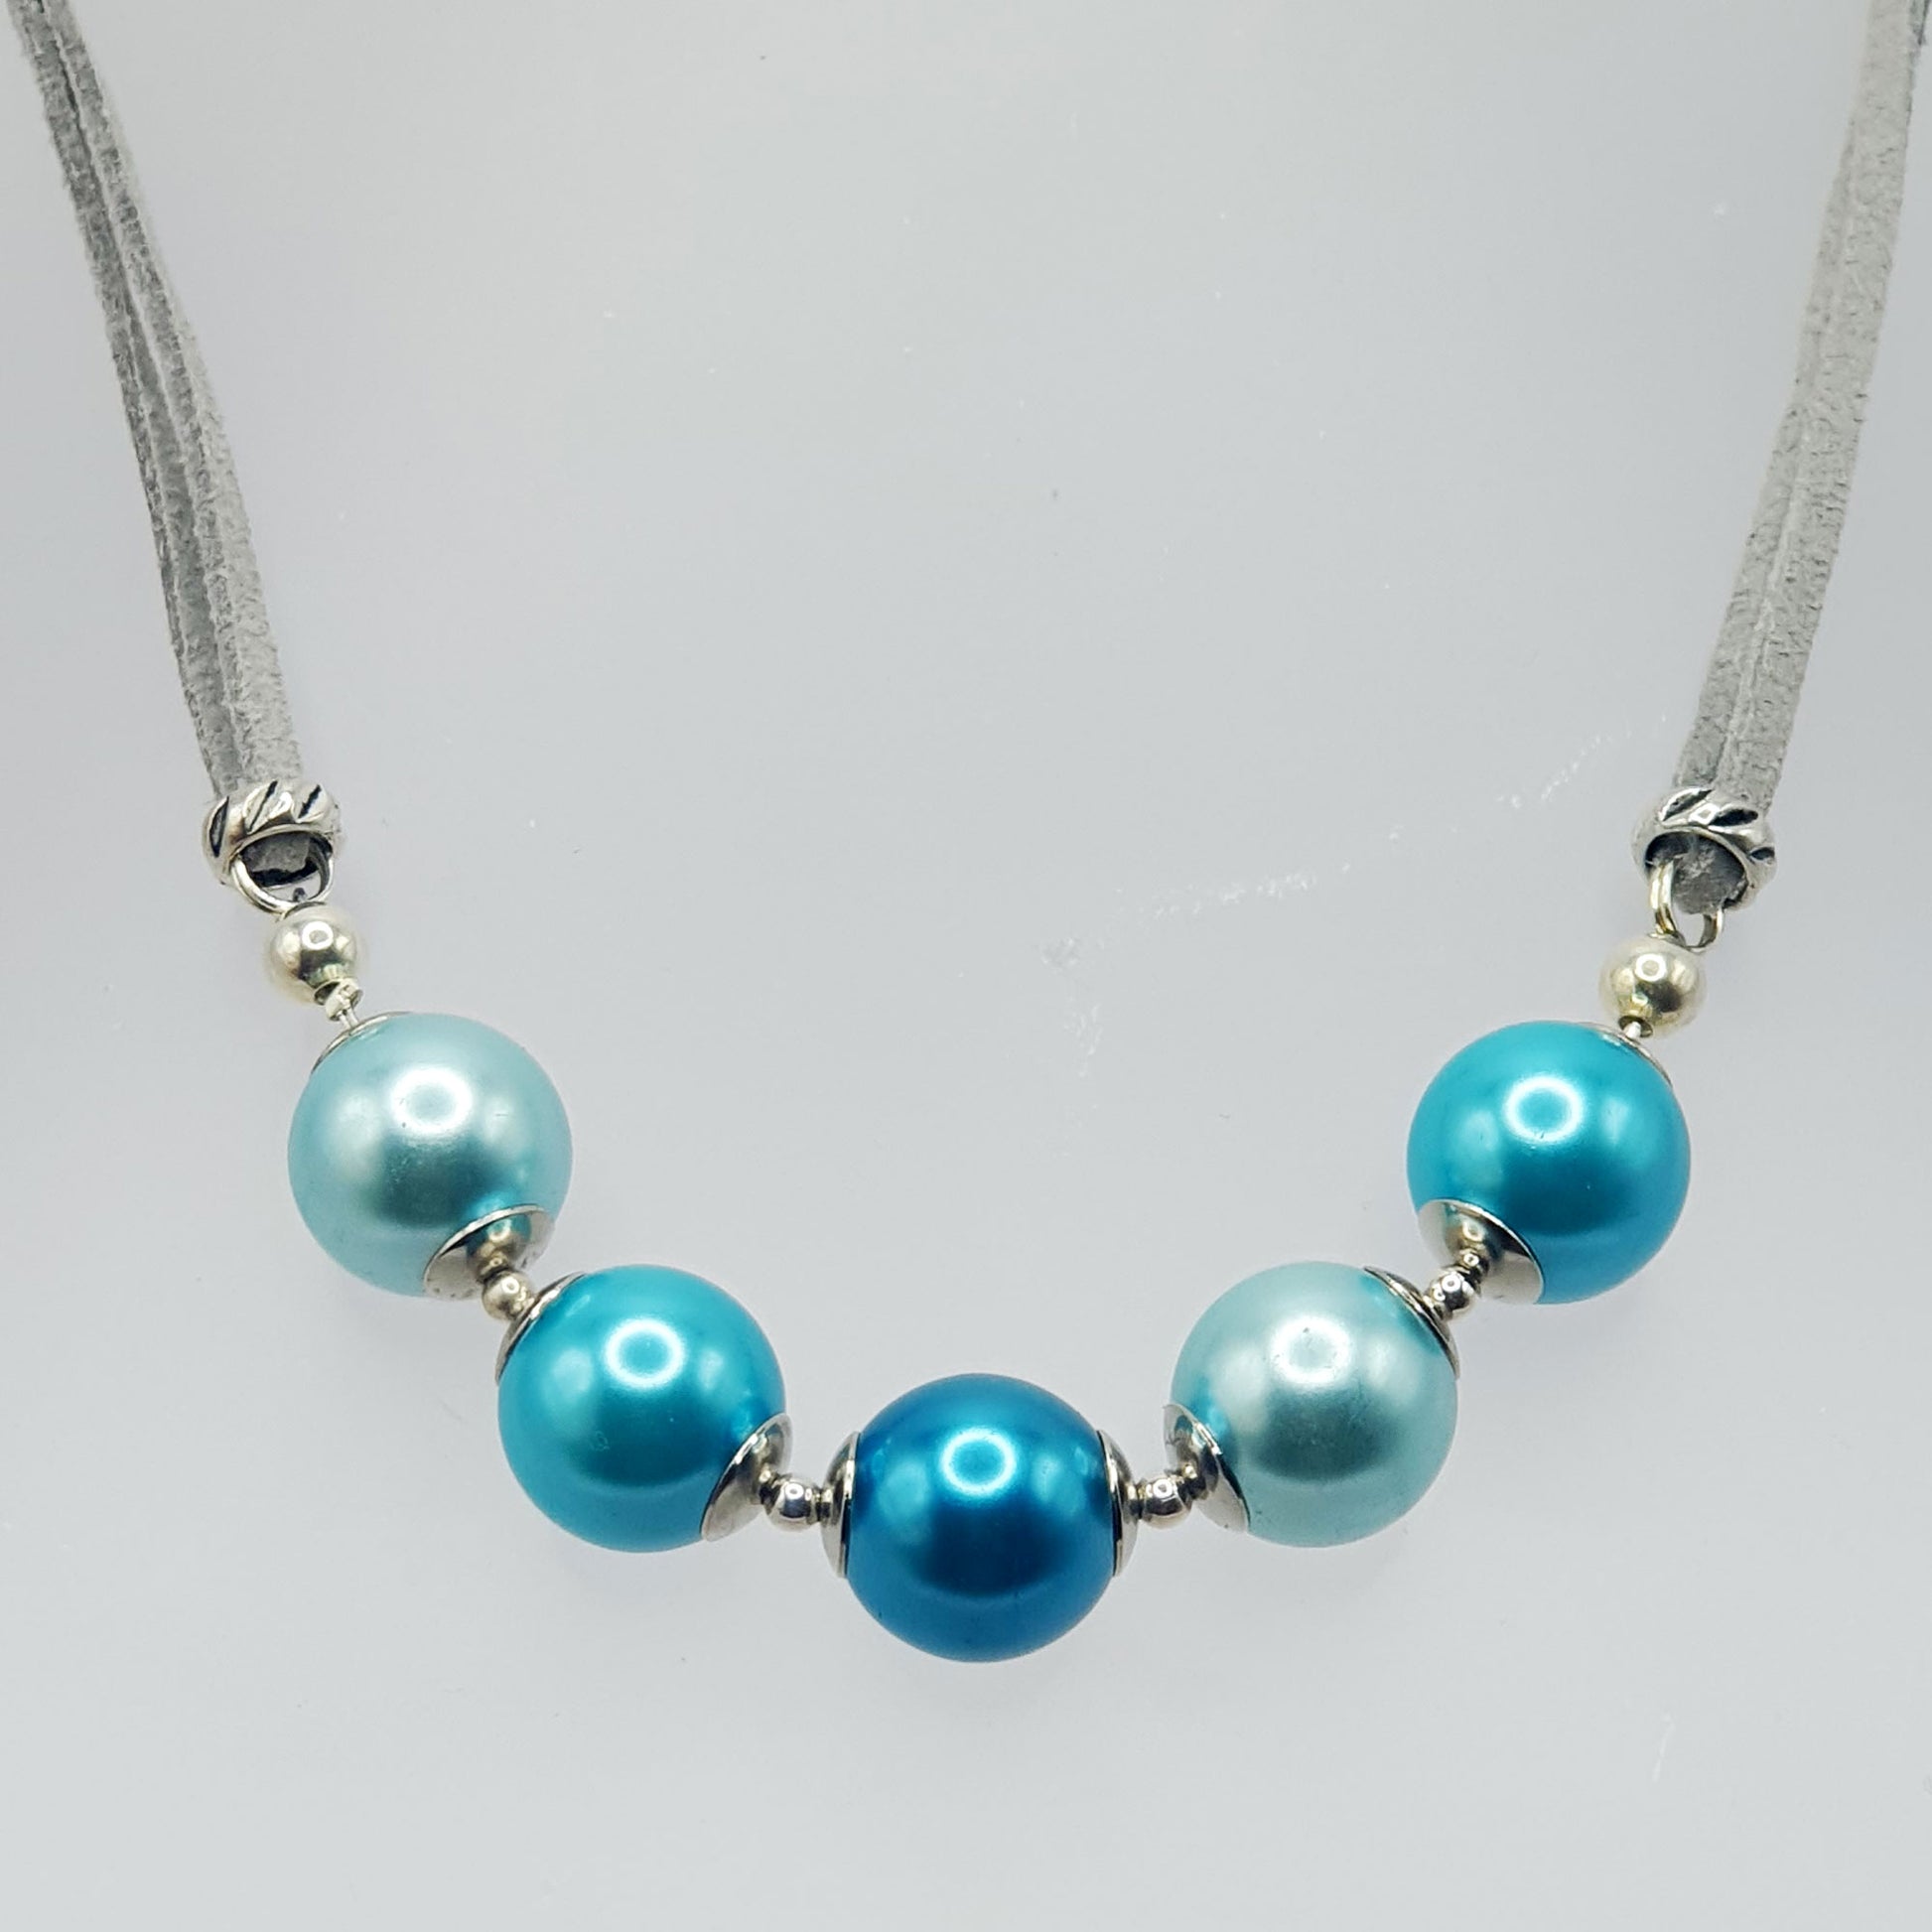 Glass pearl crescent necklace in blue tones